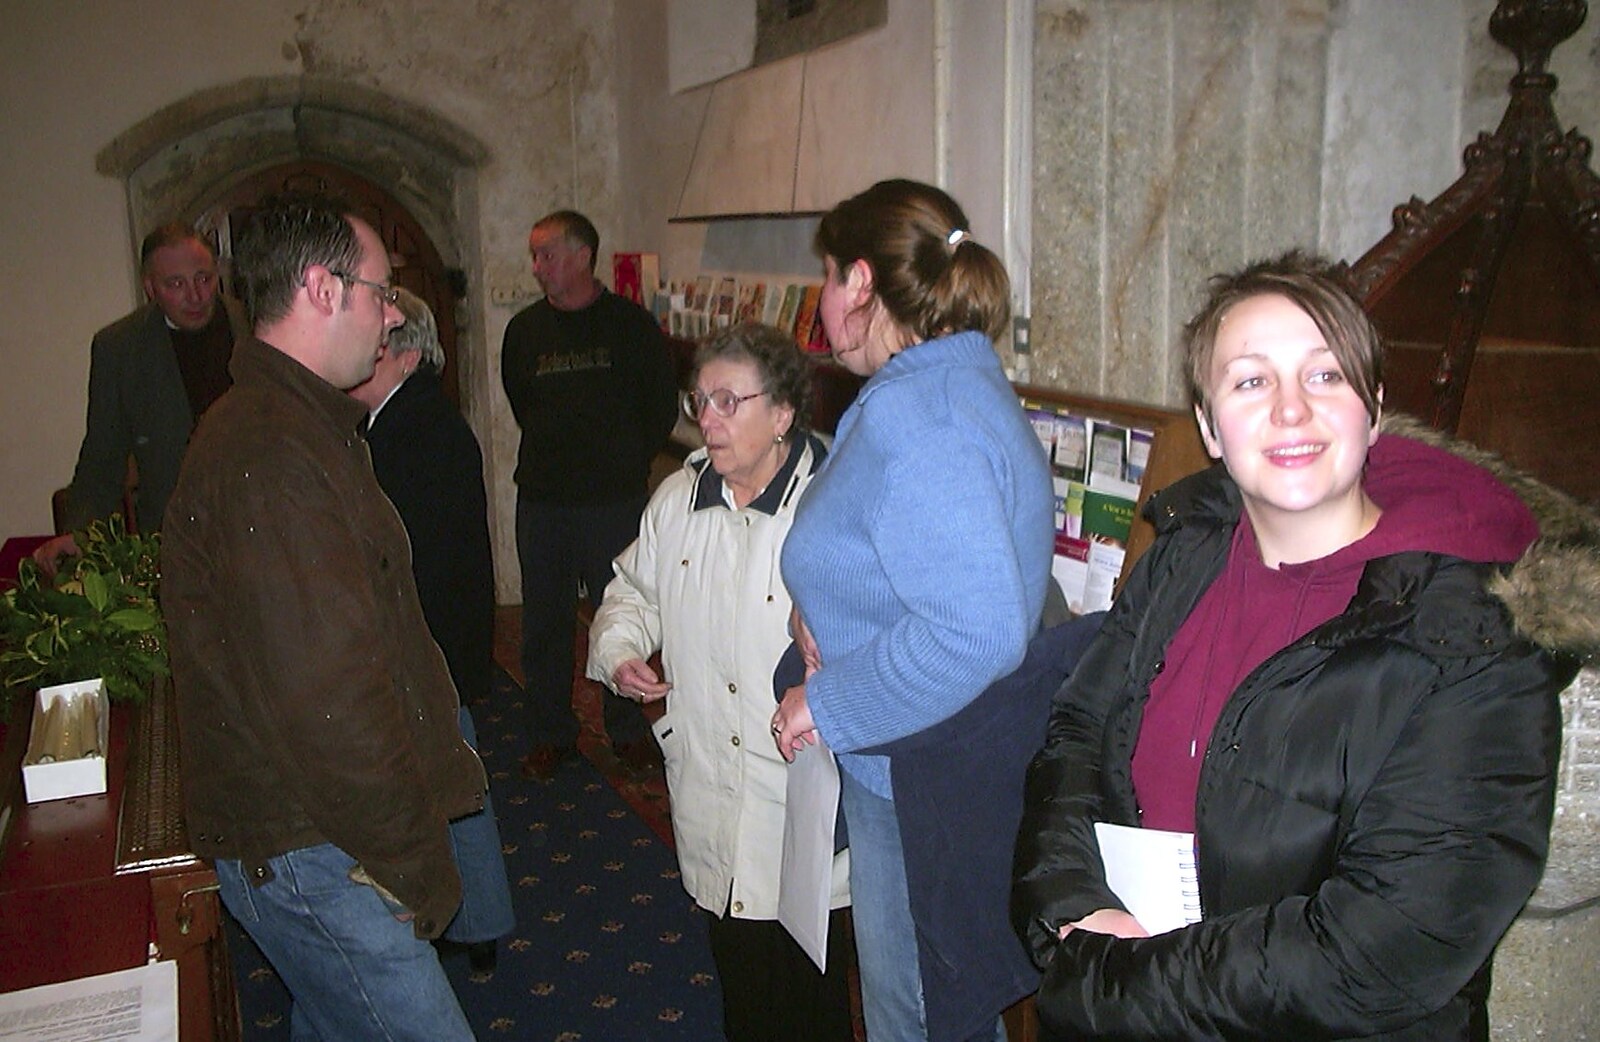 It's practice night in the church from Sis's Nearly-Christmas Wedding, Meavy, Dartmoor - 20th December 2003